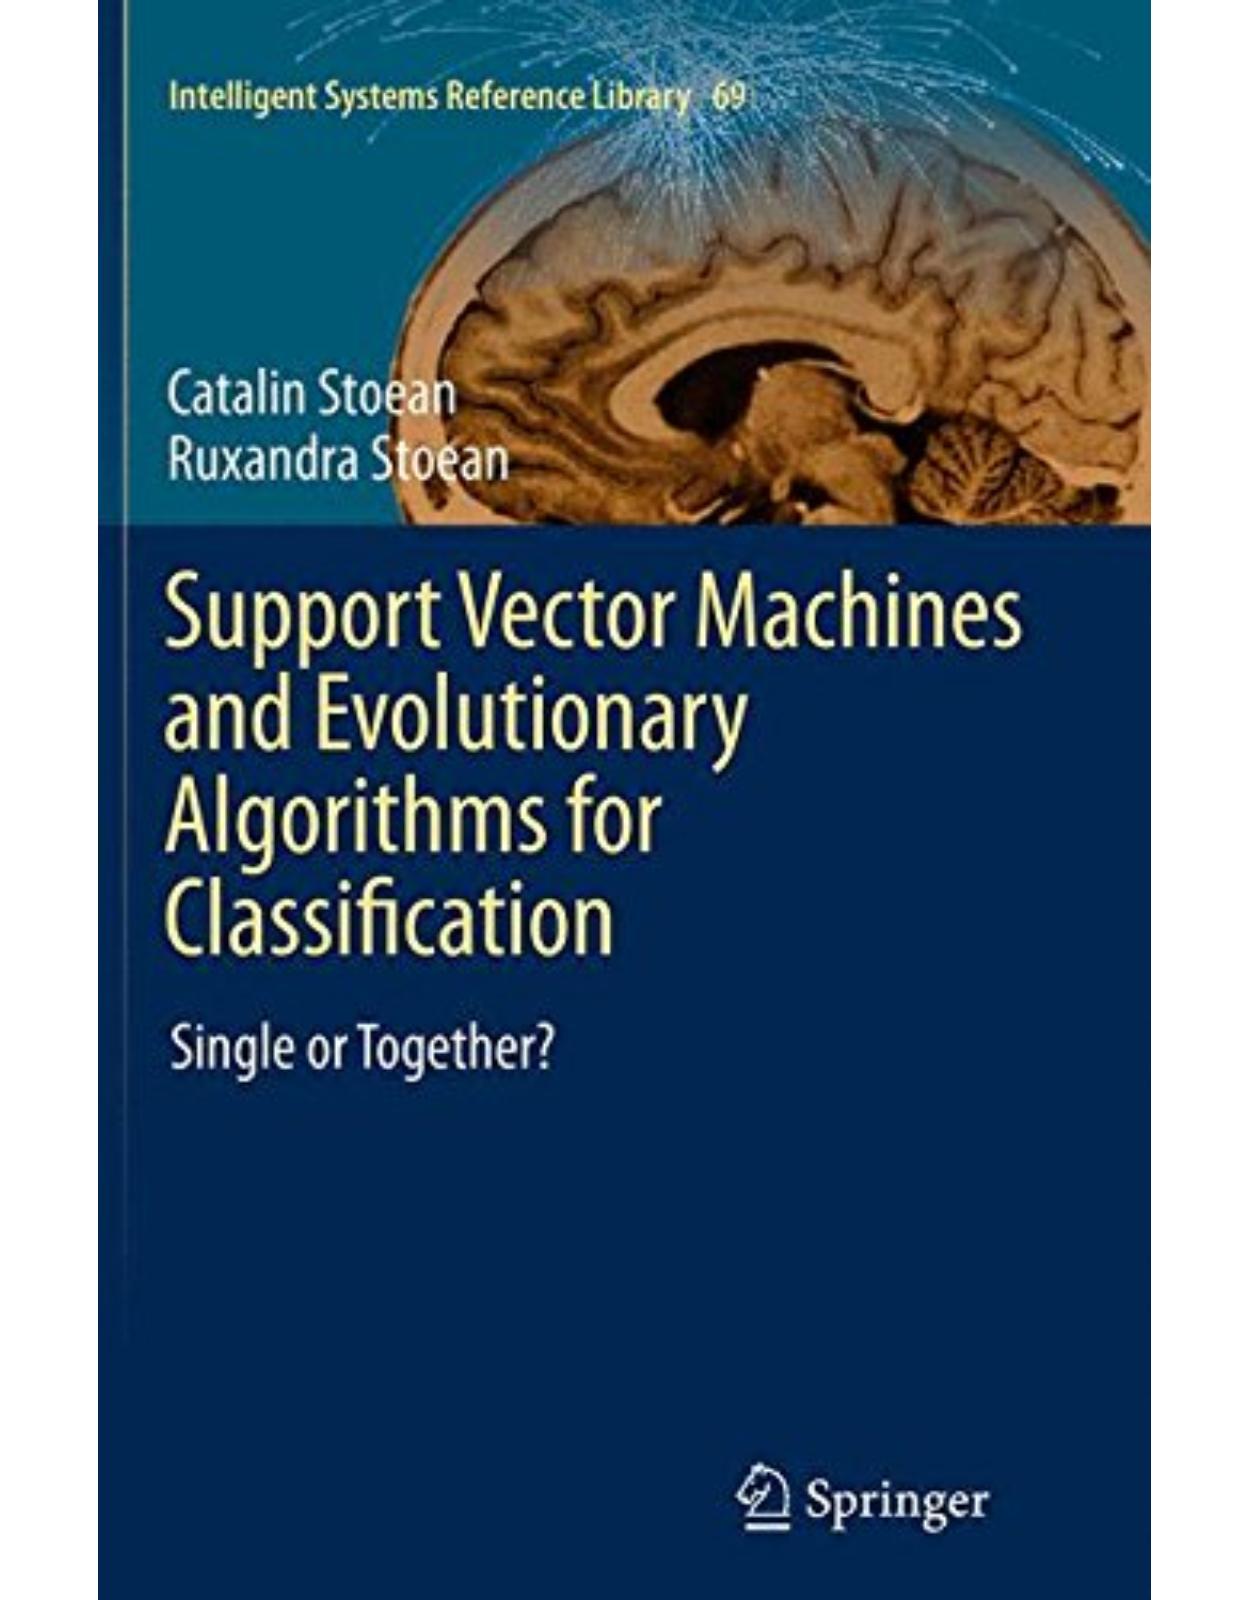 Support Vector Machines and Evolutionary Algorithms for Classification: Single or Together? 